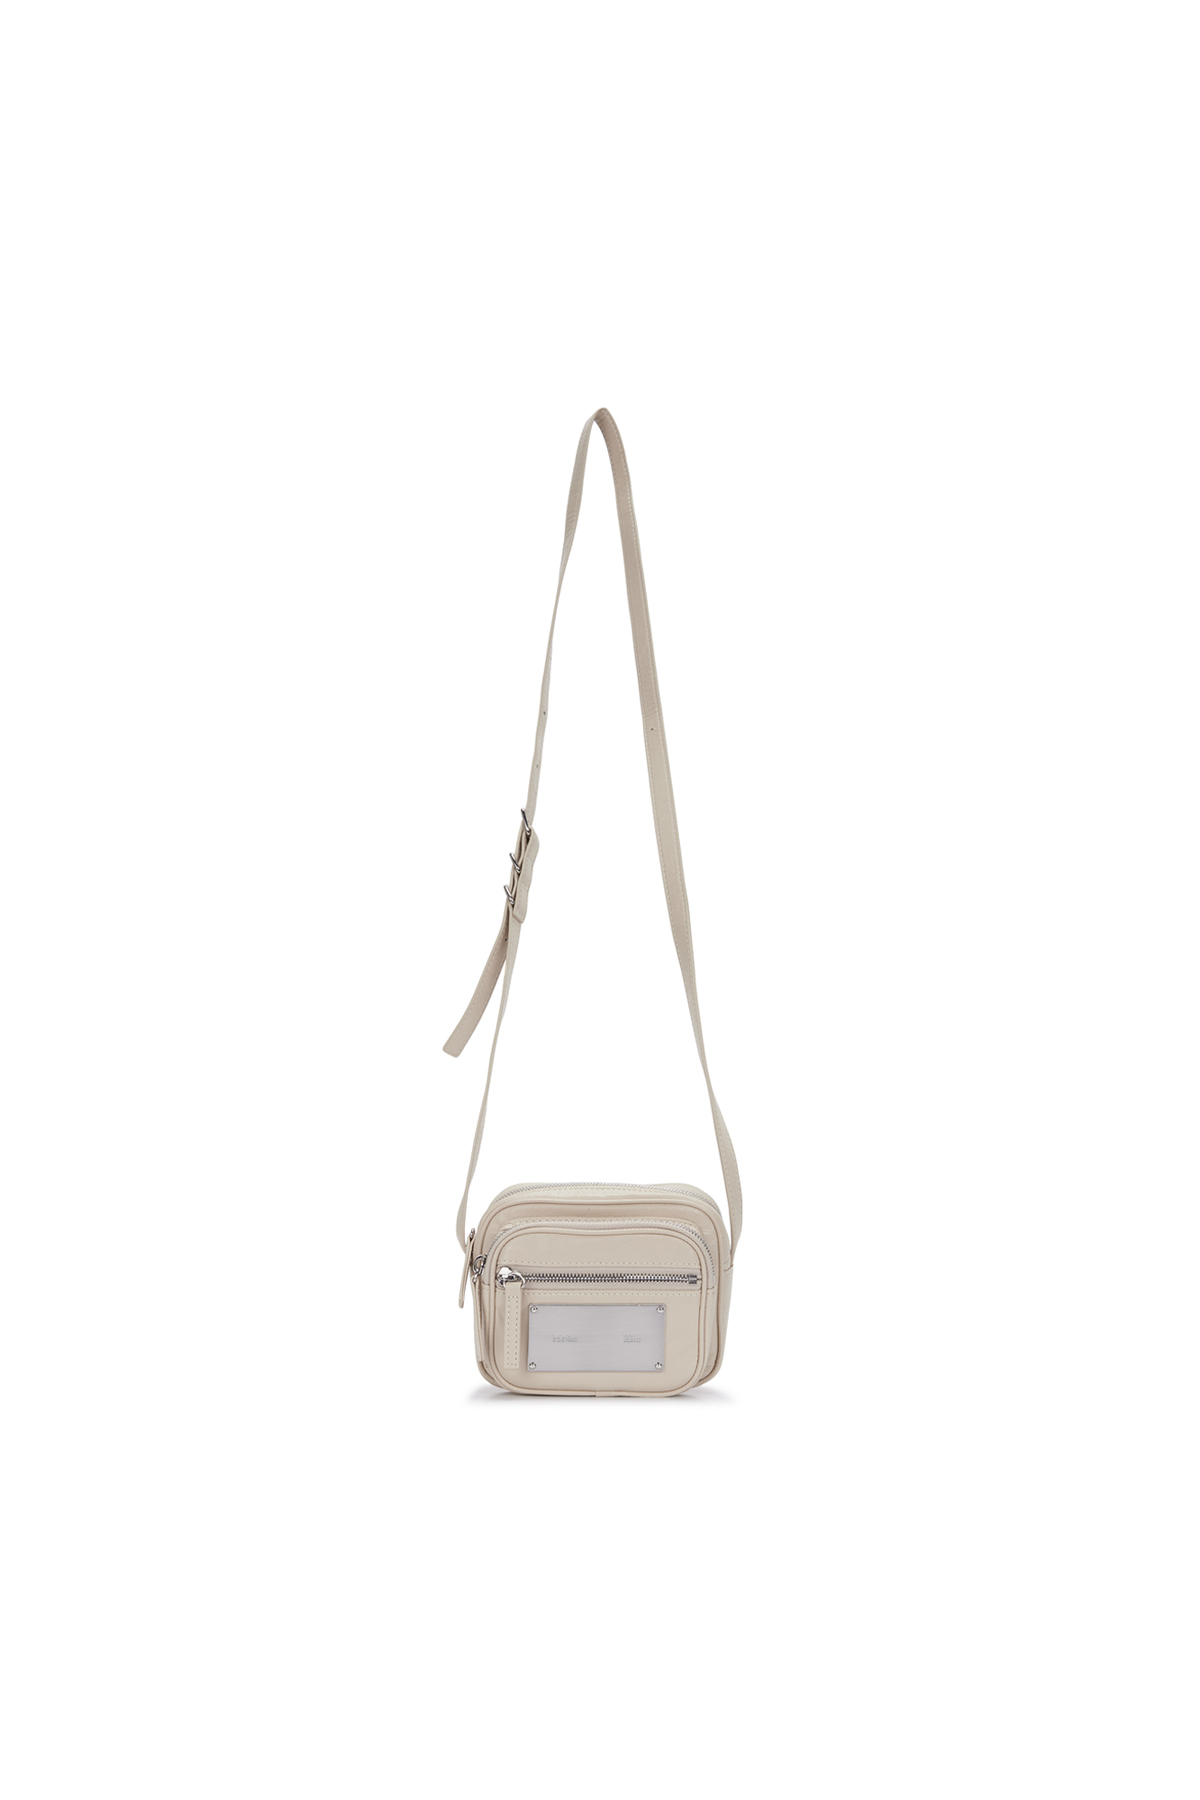 SQUARE LEATHER CROSS BAG IN IVORY